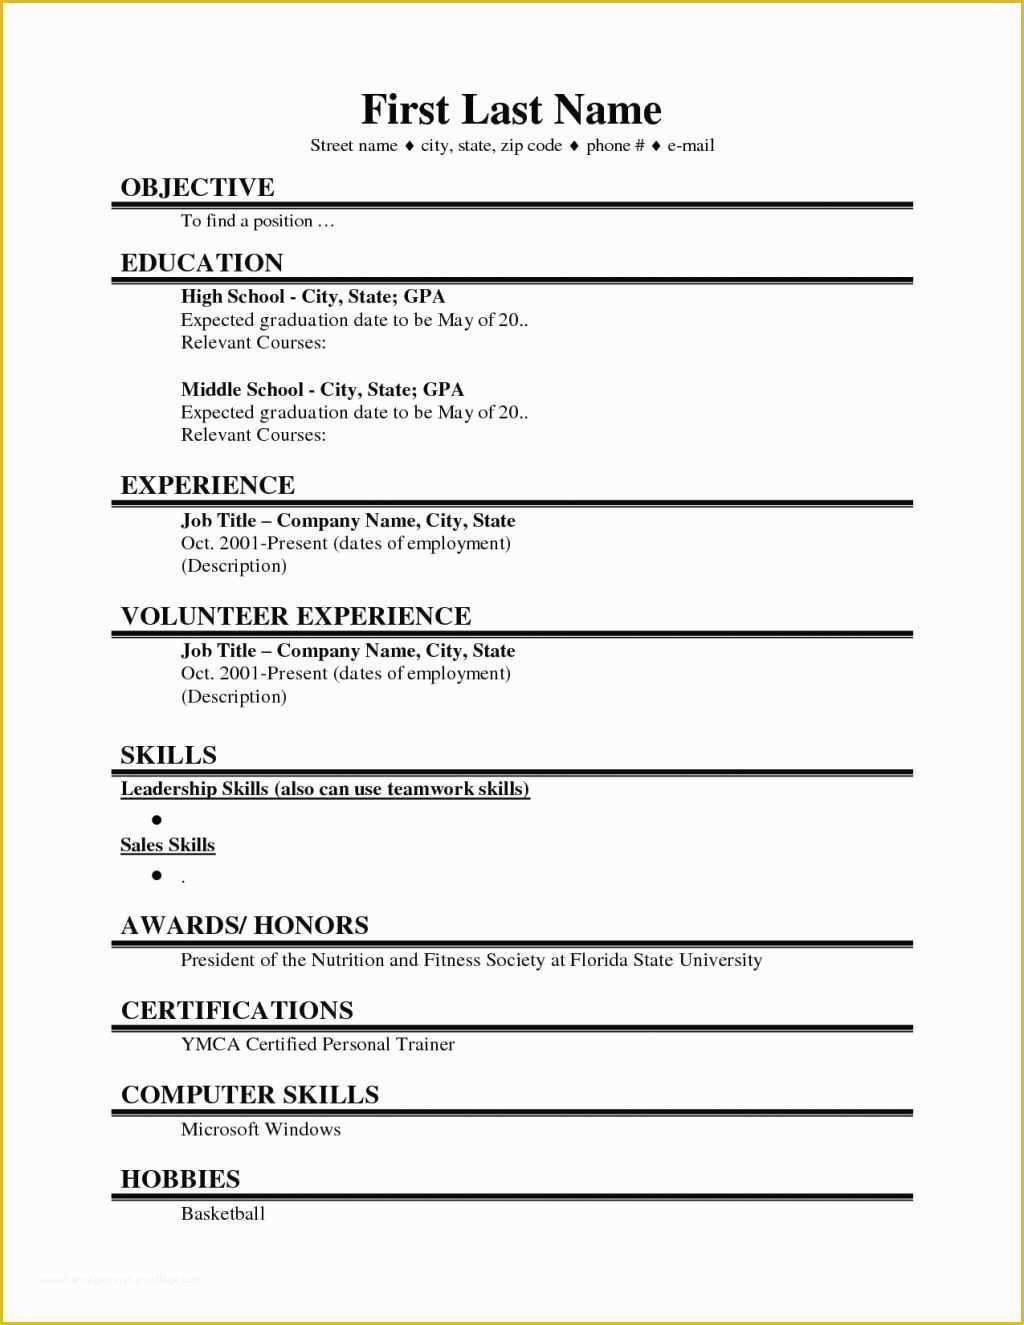 Google Docs Resume Template Free Of Resume and Template 64 Fantastic Free Resume Templates